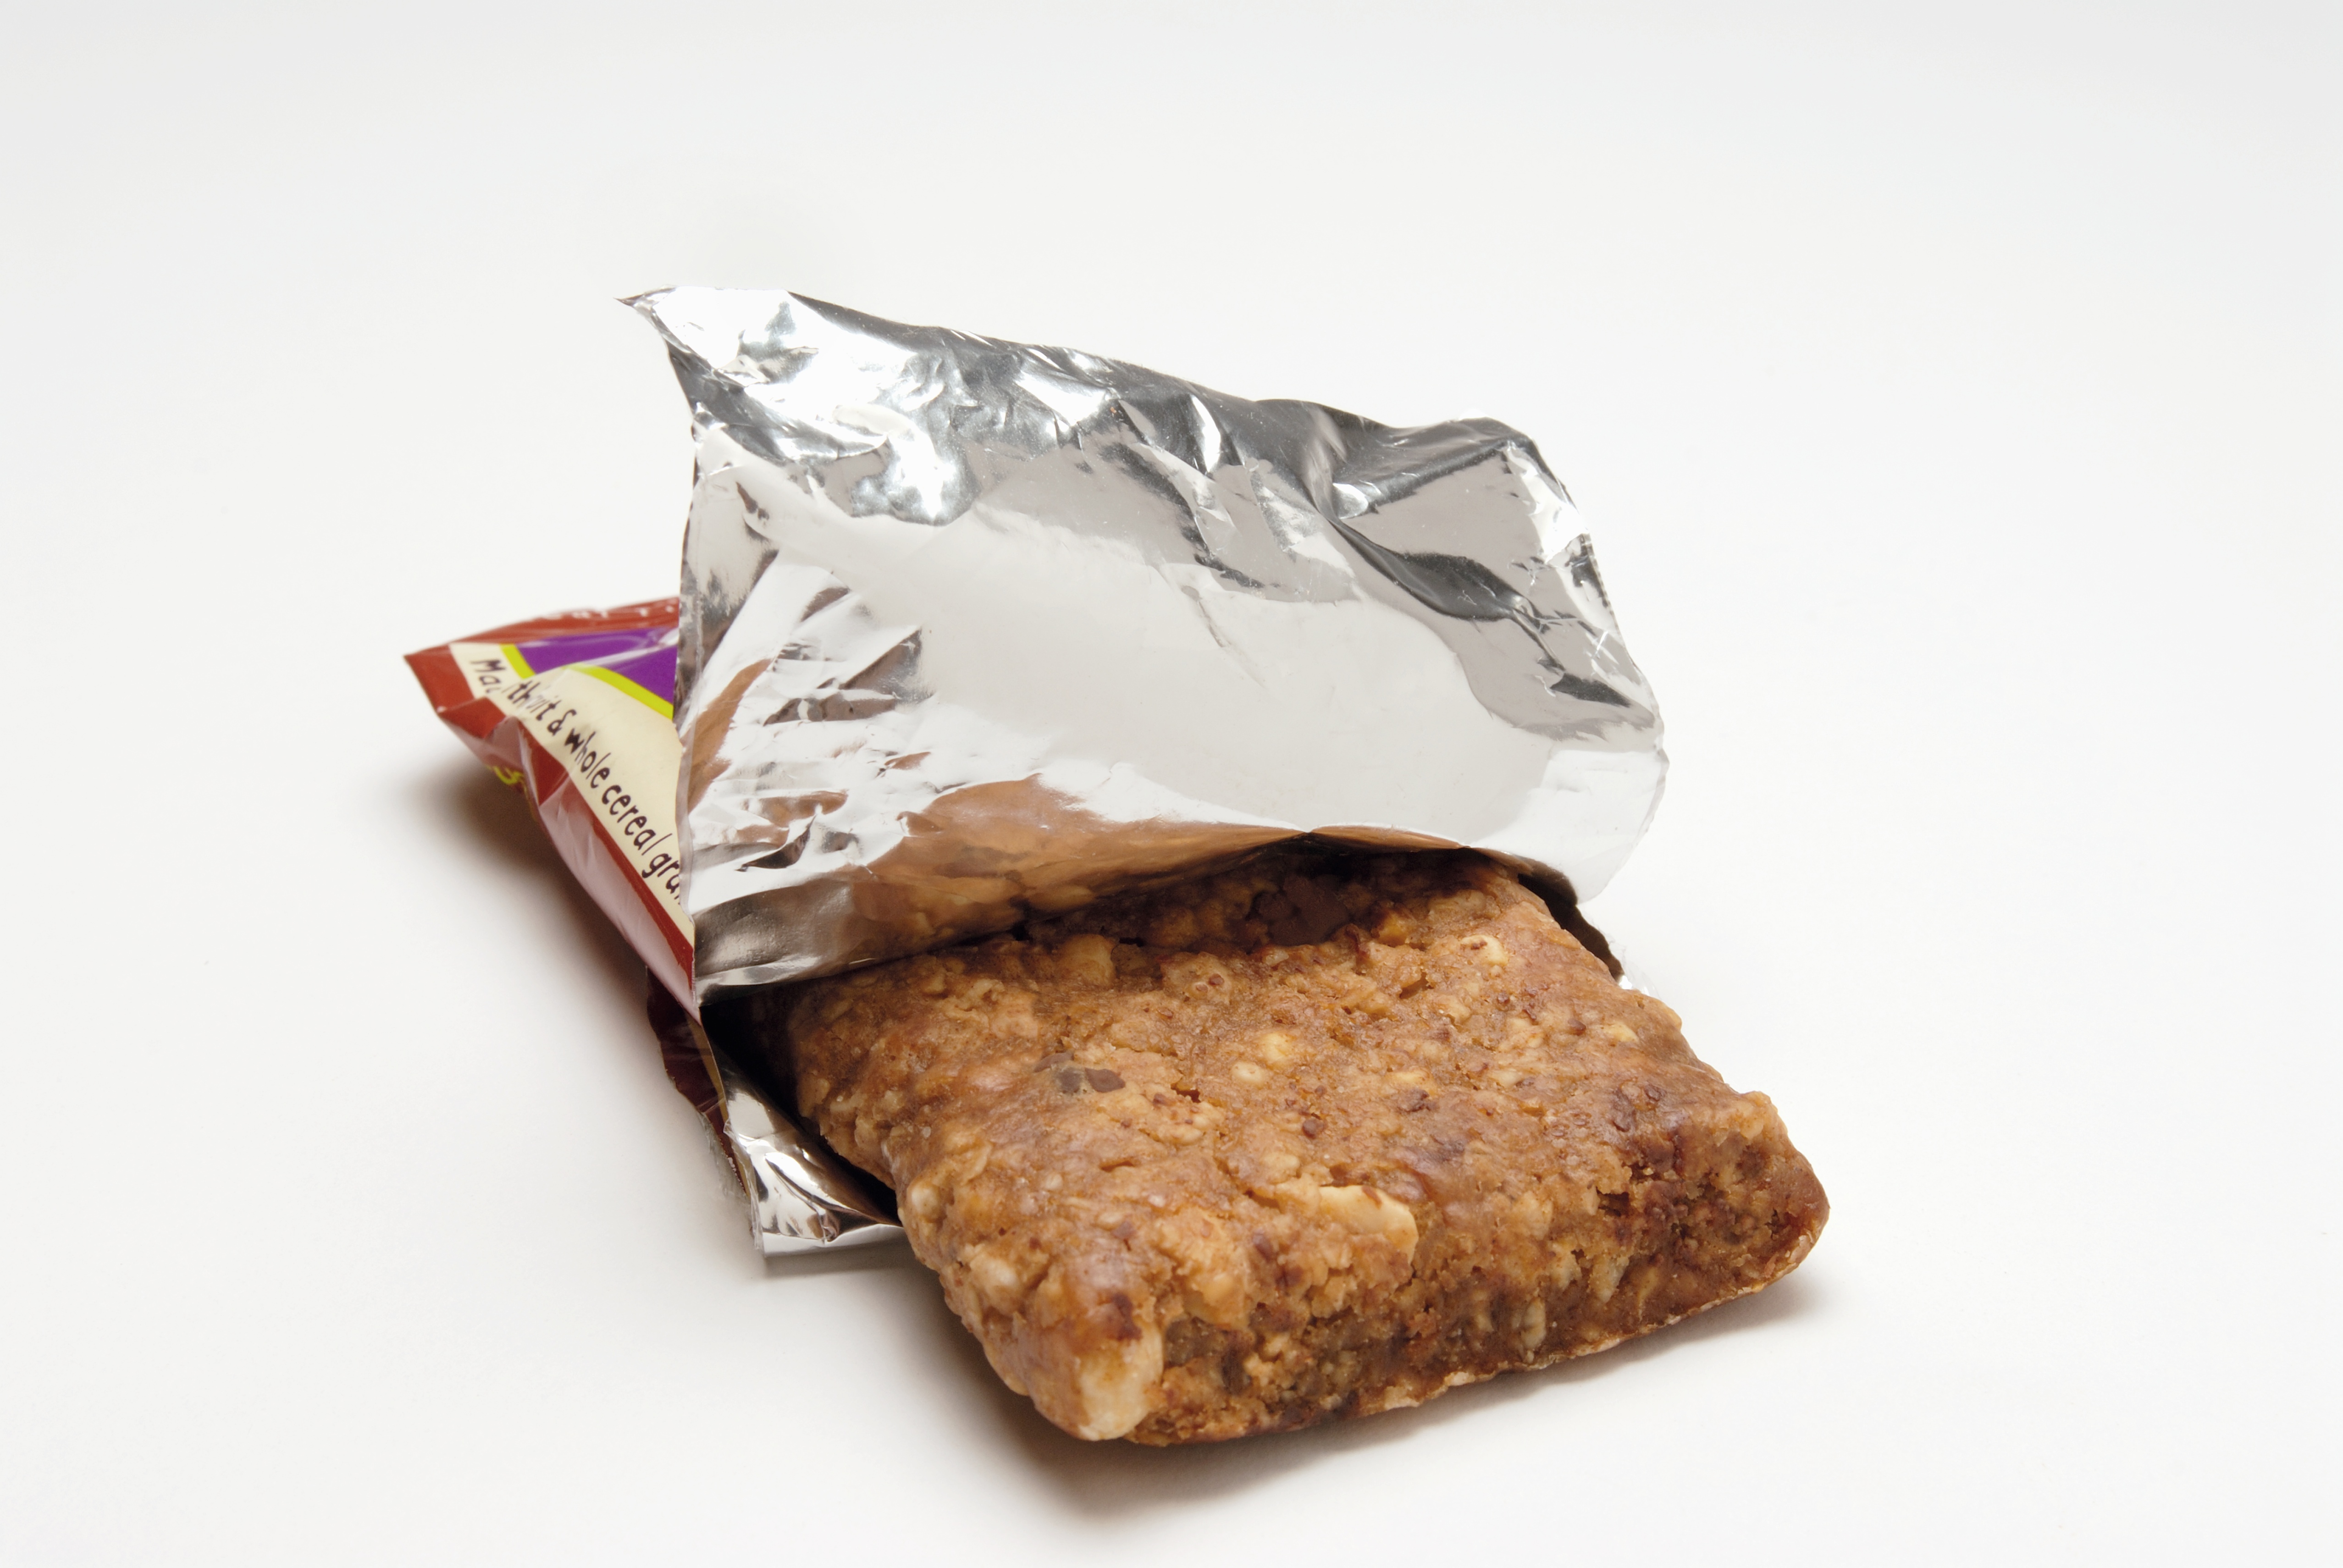 The Healthiest Granola Bars, According To Nutrition Experts | Time